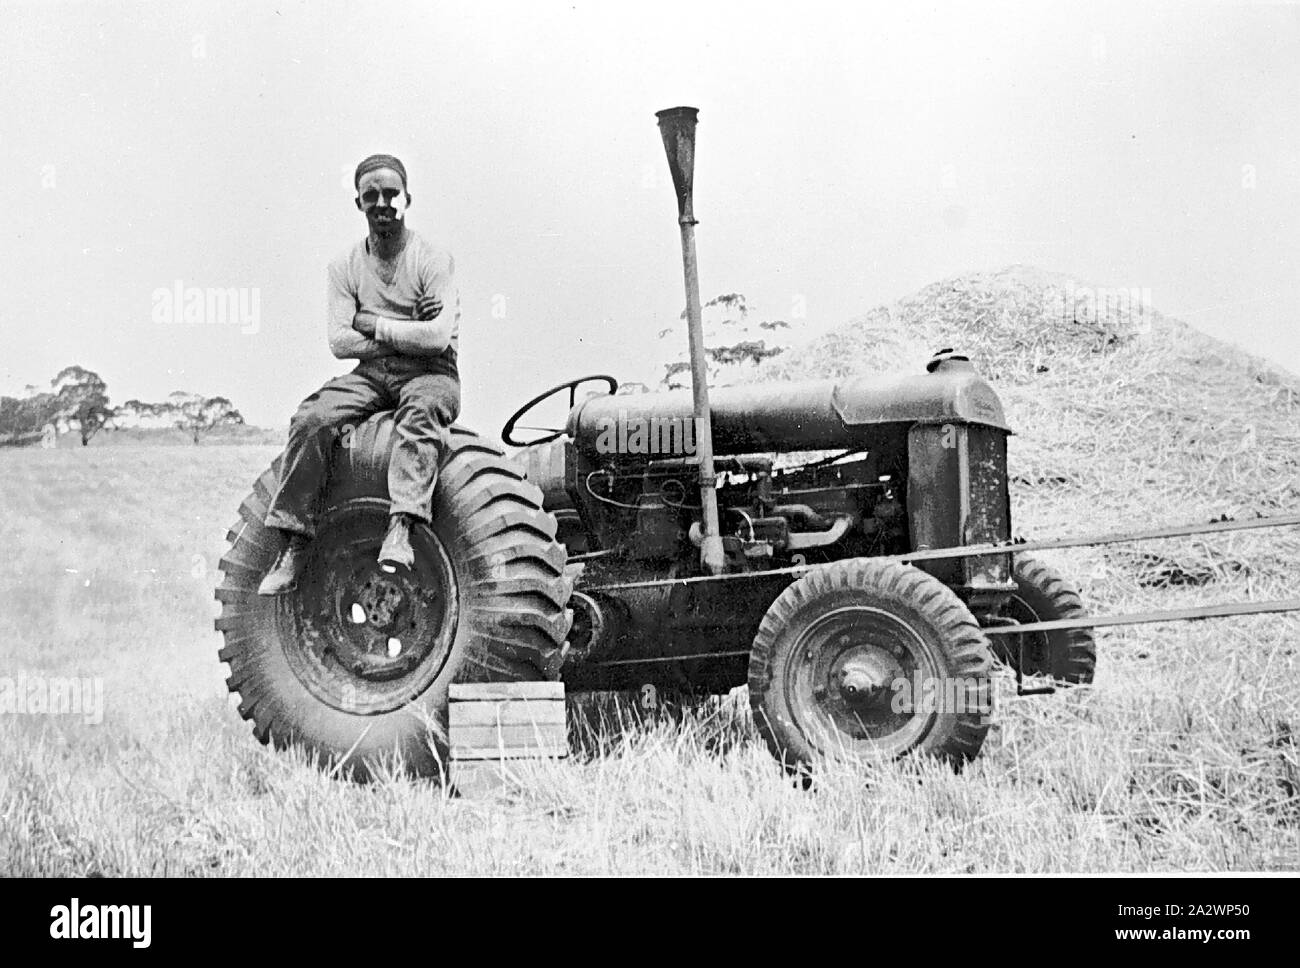 Negative - Yendon, Victoria, 1939, Man sitting with crossed arms on the wheel of a Fordson tractor that has a conveyor belt attached to it. He wears a long sleeve shirt, pants and boots. The man has a close fitting cap on his head and there is a large white bandage on his left cheek.There is a haystack behind the tractor Stock Photo